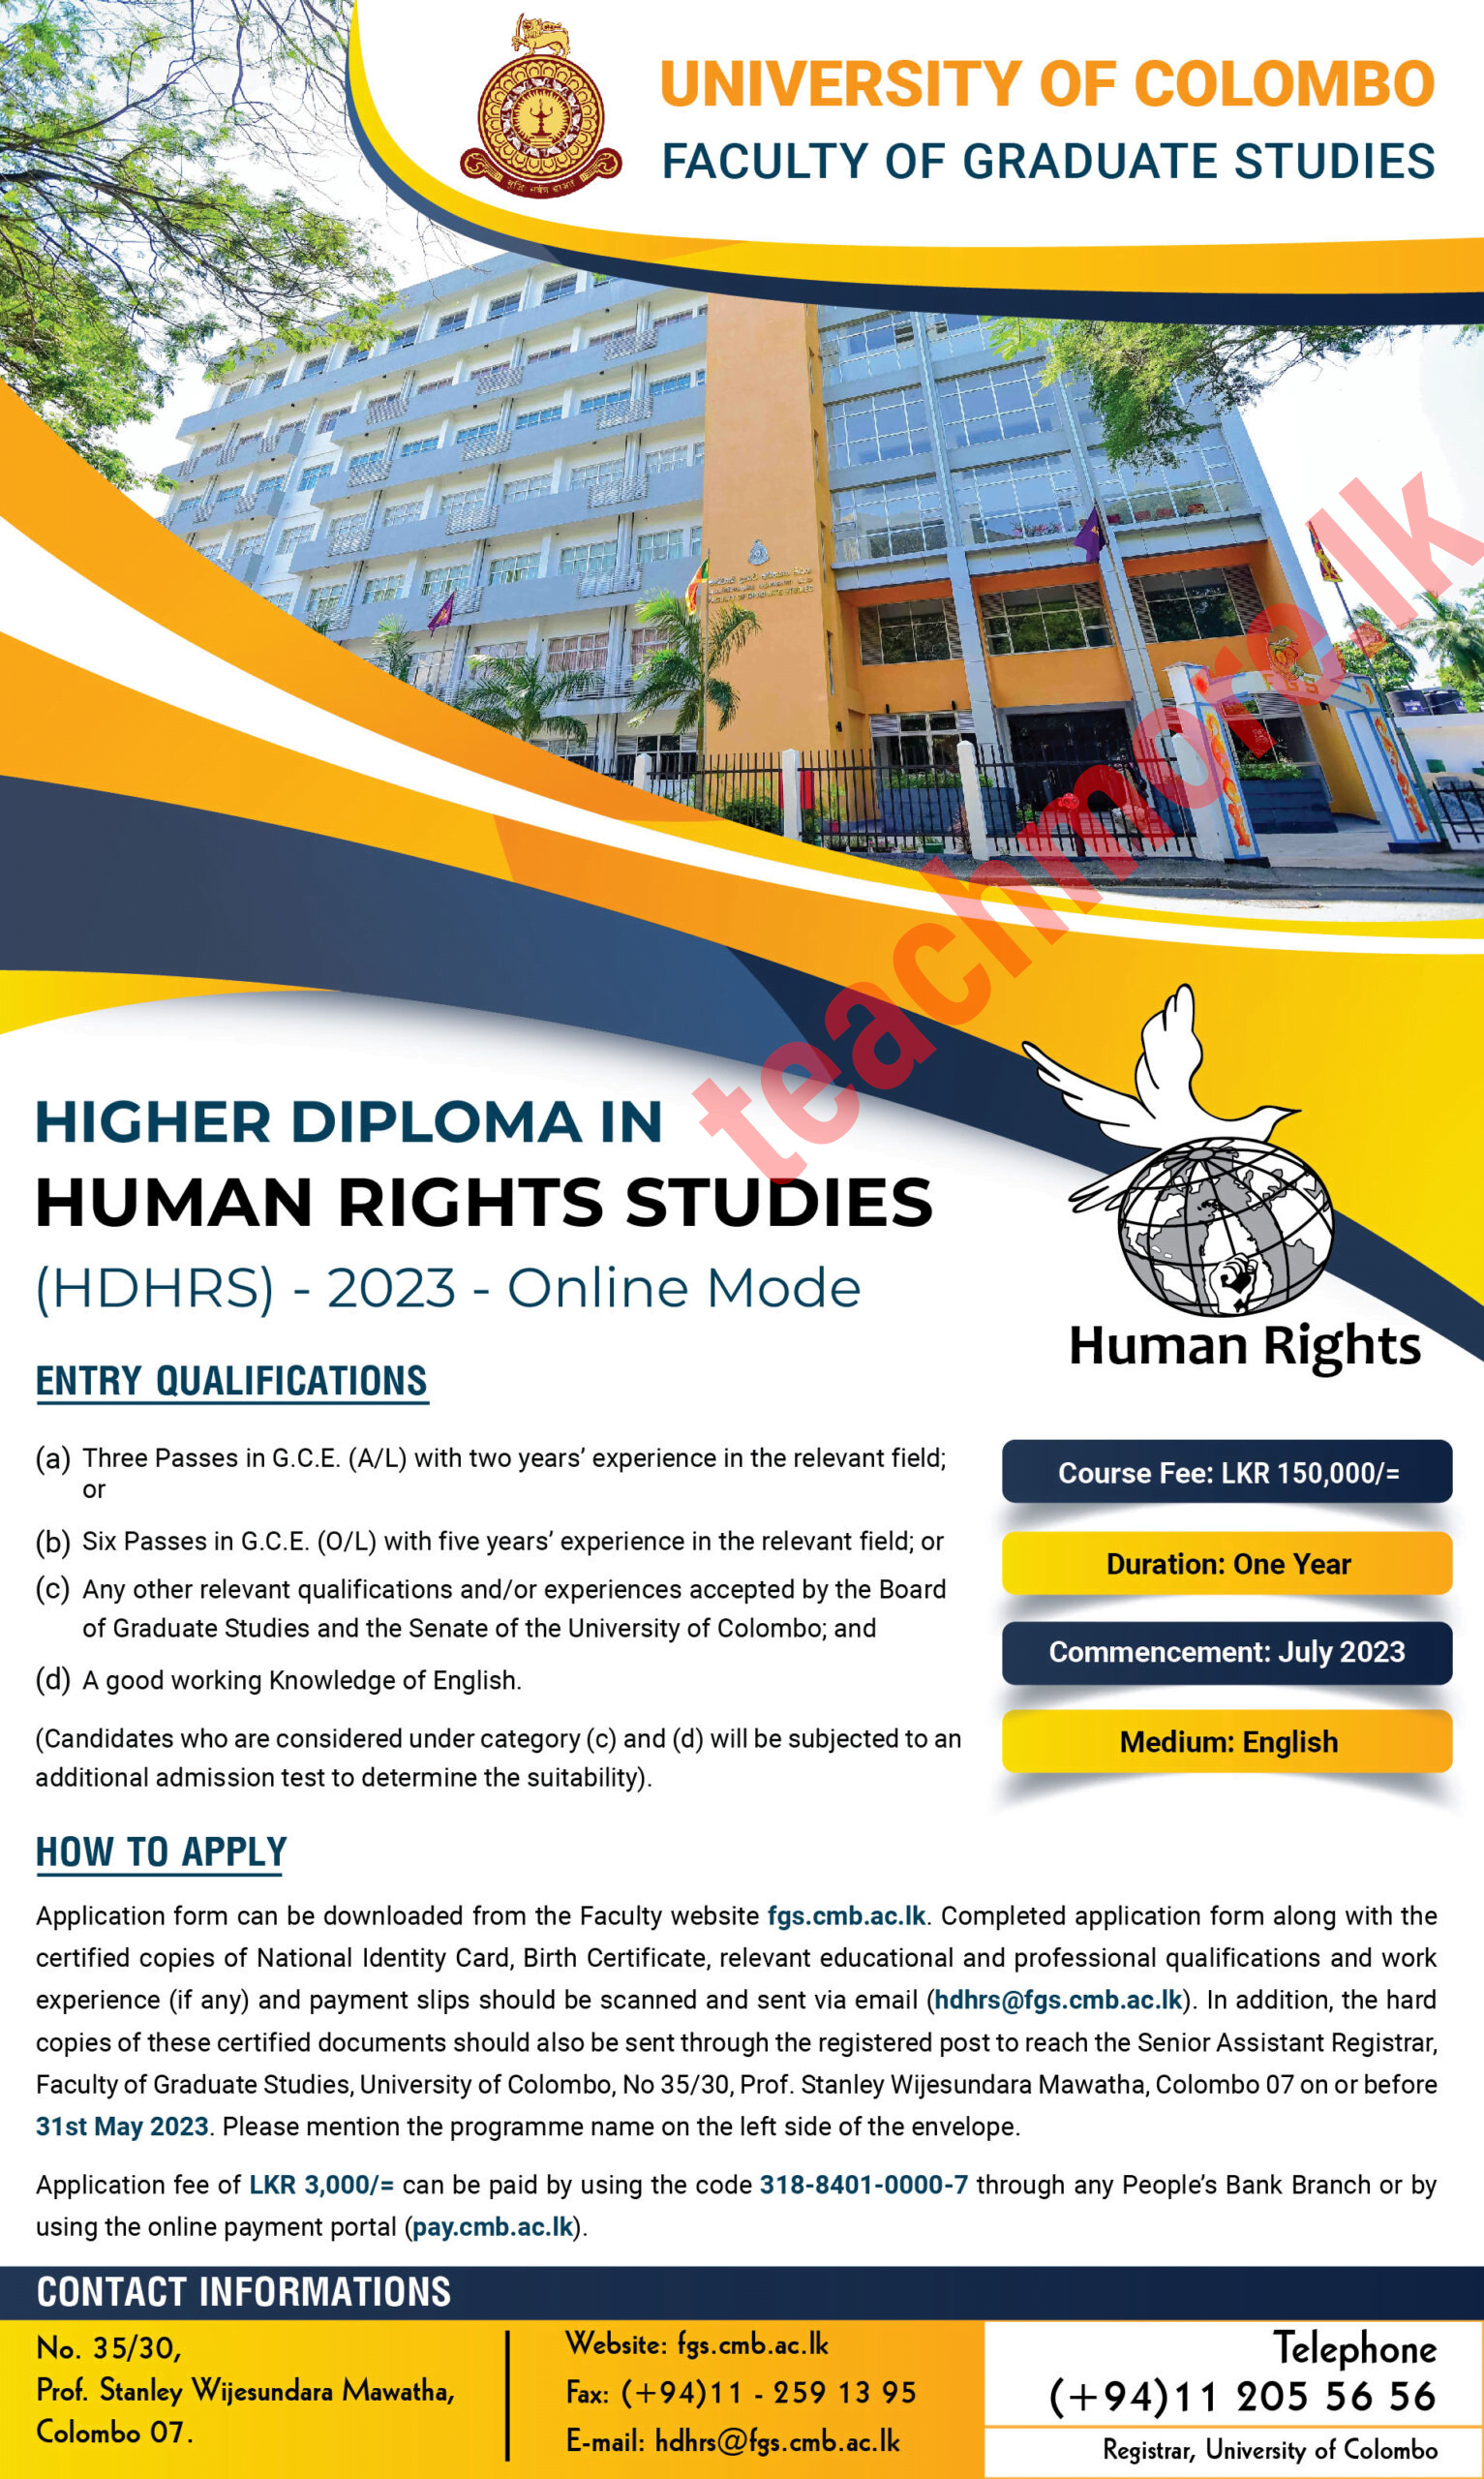 Higher Diploma in Human Rights Studies (HDHRS) - 2023 - Online Mode